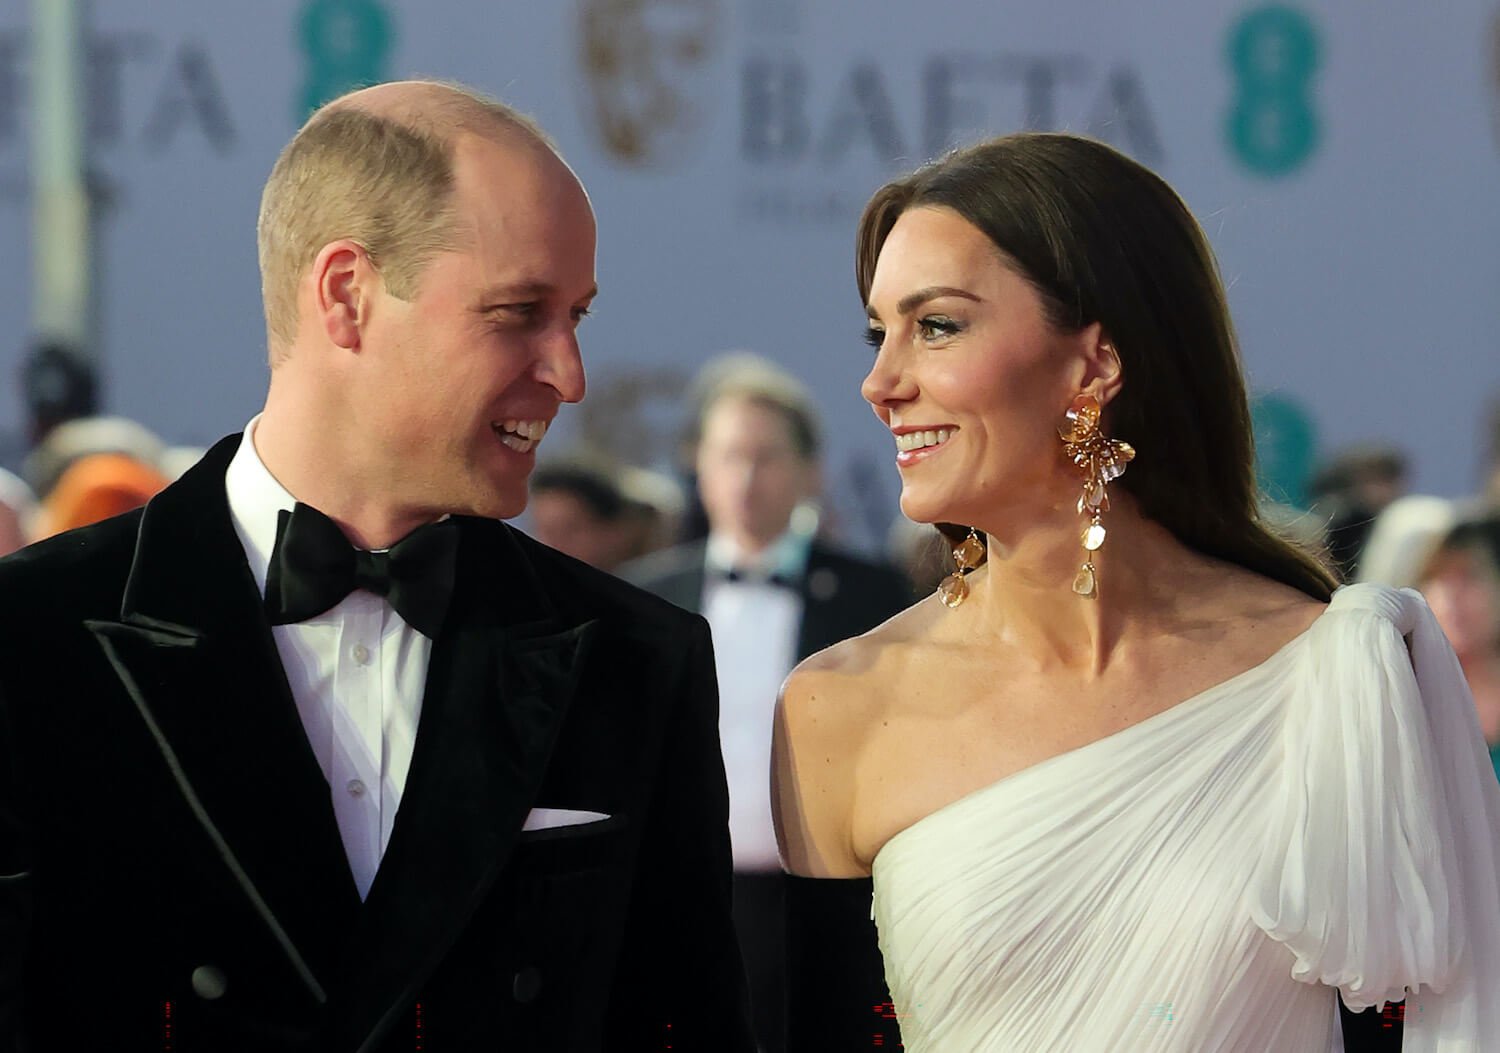 Kate Middleton wears a white gown as she smiles and looks at husband Prince William, dressed in a tuxedo.